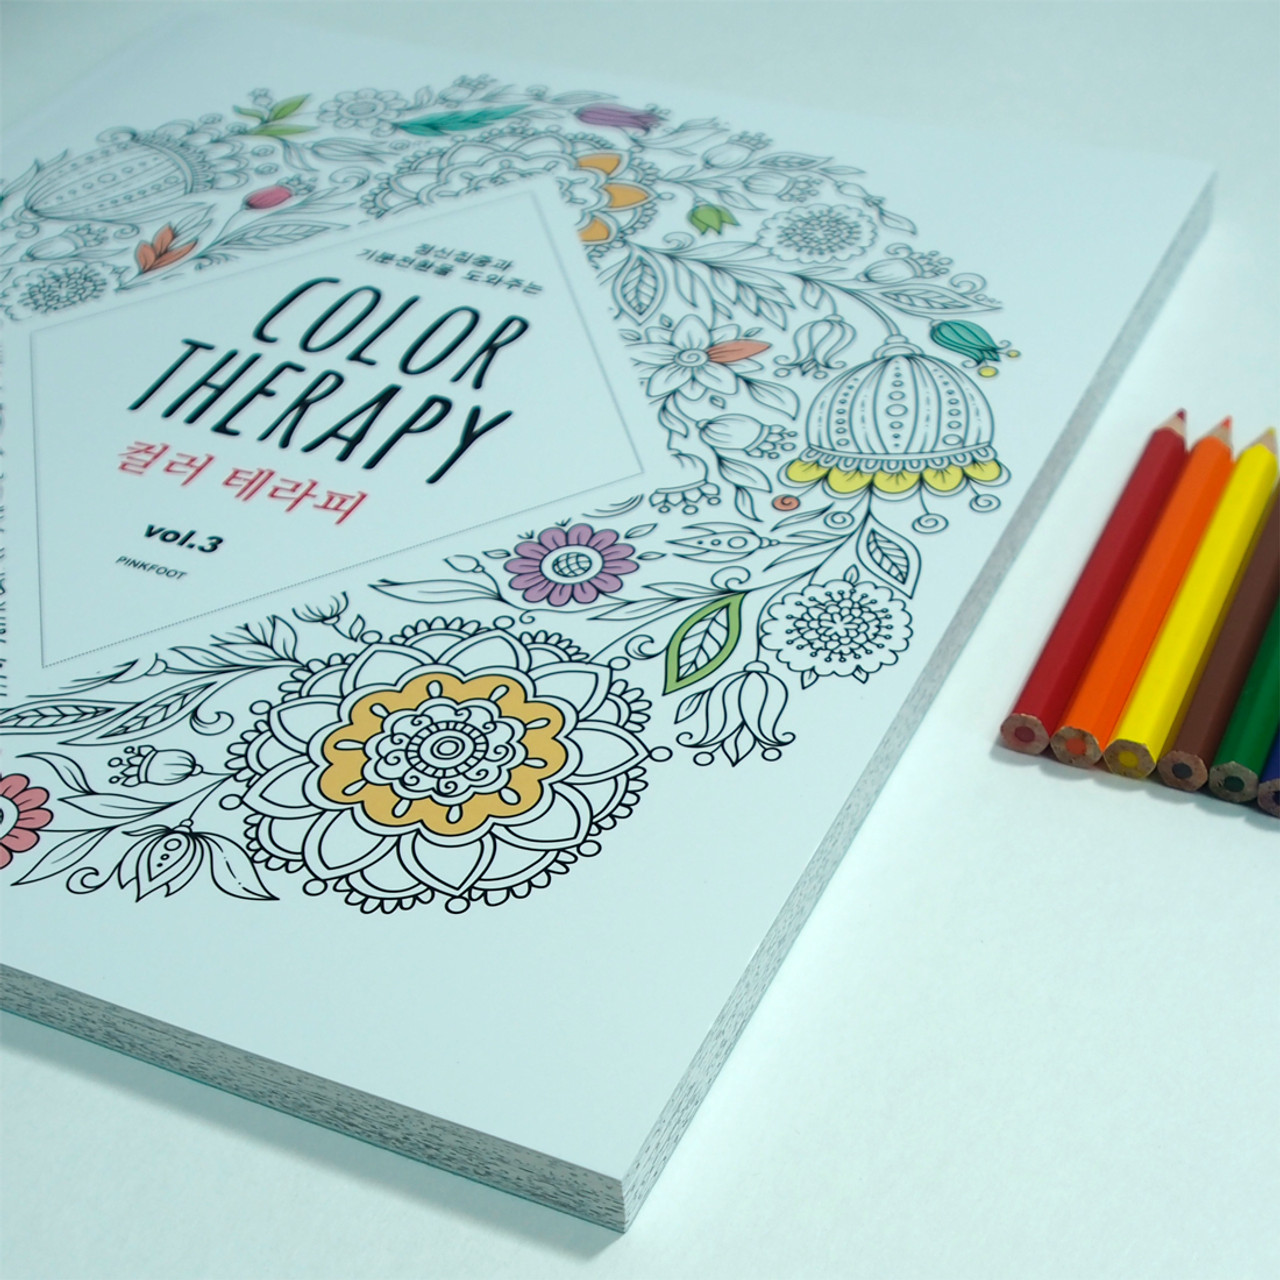 Coloring Therapy Book Vol.3 (Mint) With 12 Mini Color Pencils(Shipping for  only US) - AHZOA